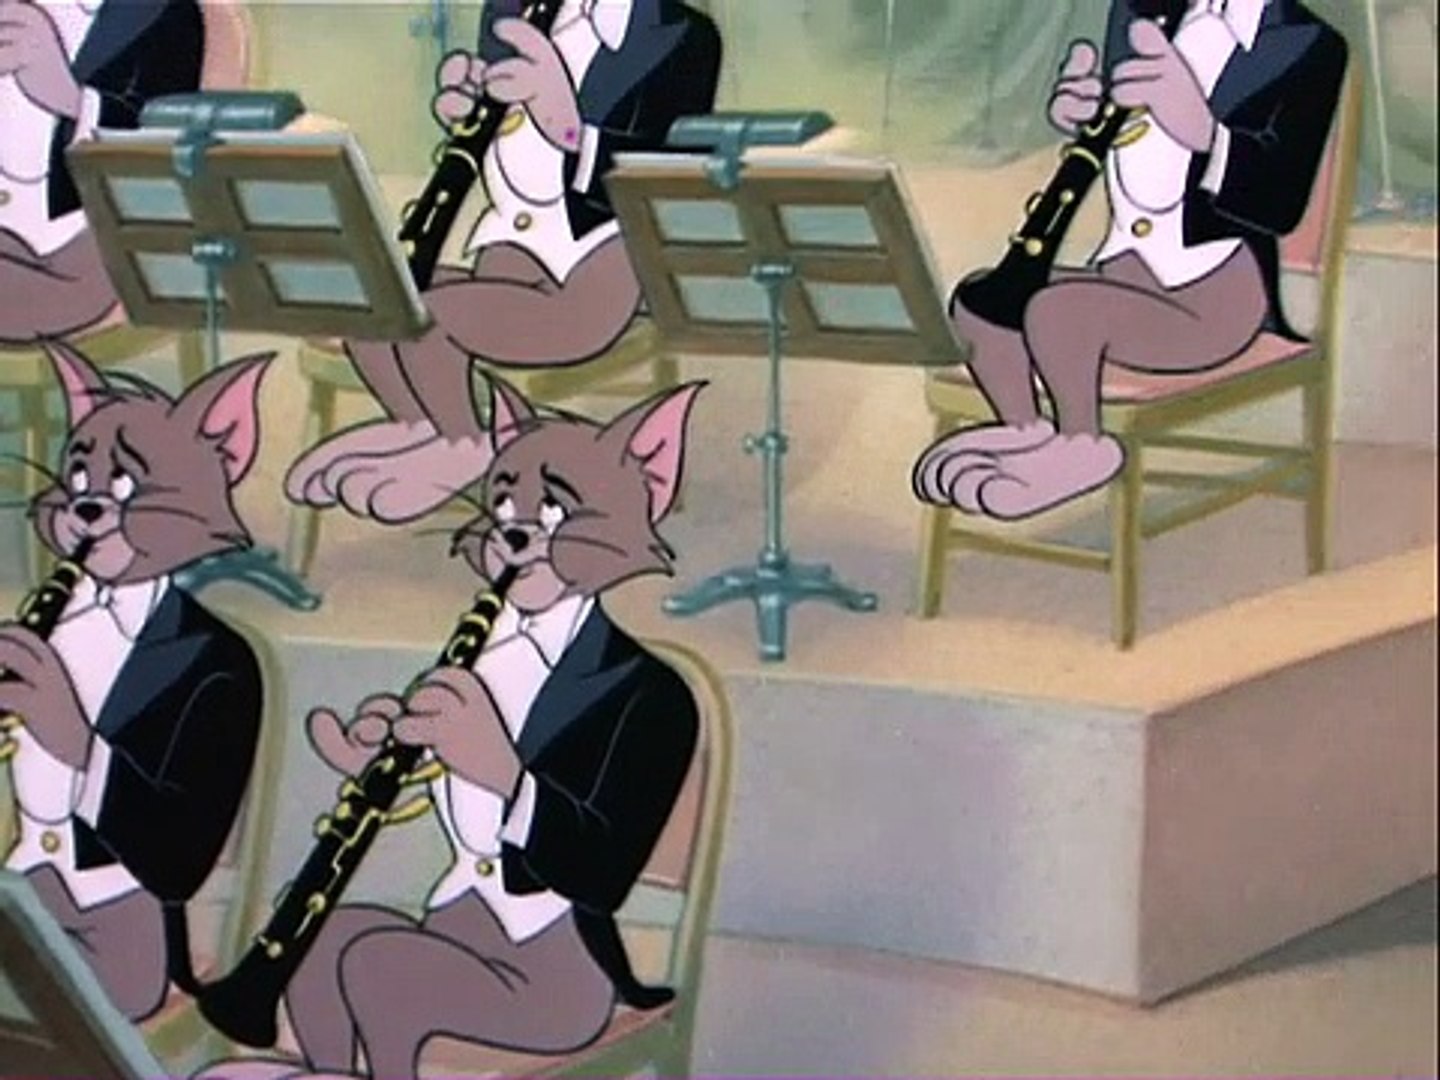 Tom And Jerry, ep 52 - The Hollywood Bowl (1950) - video Dailymotion